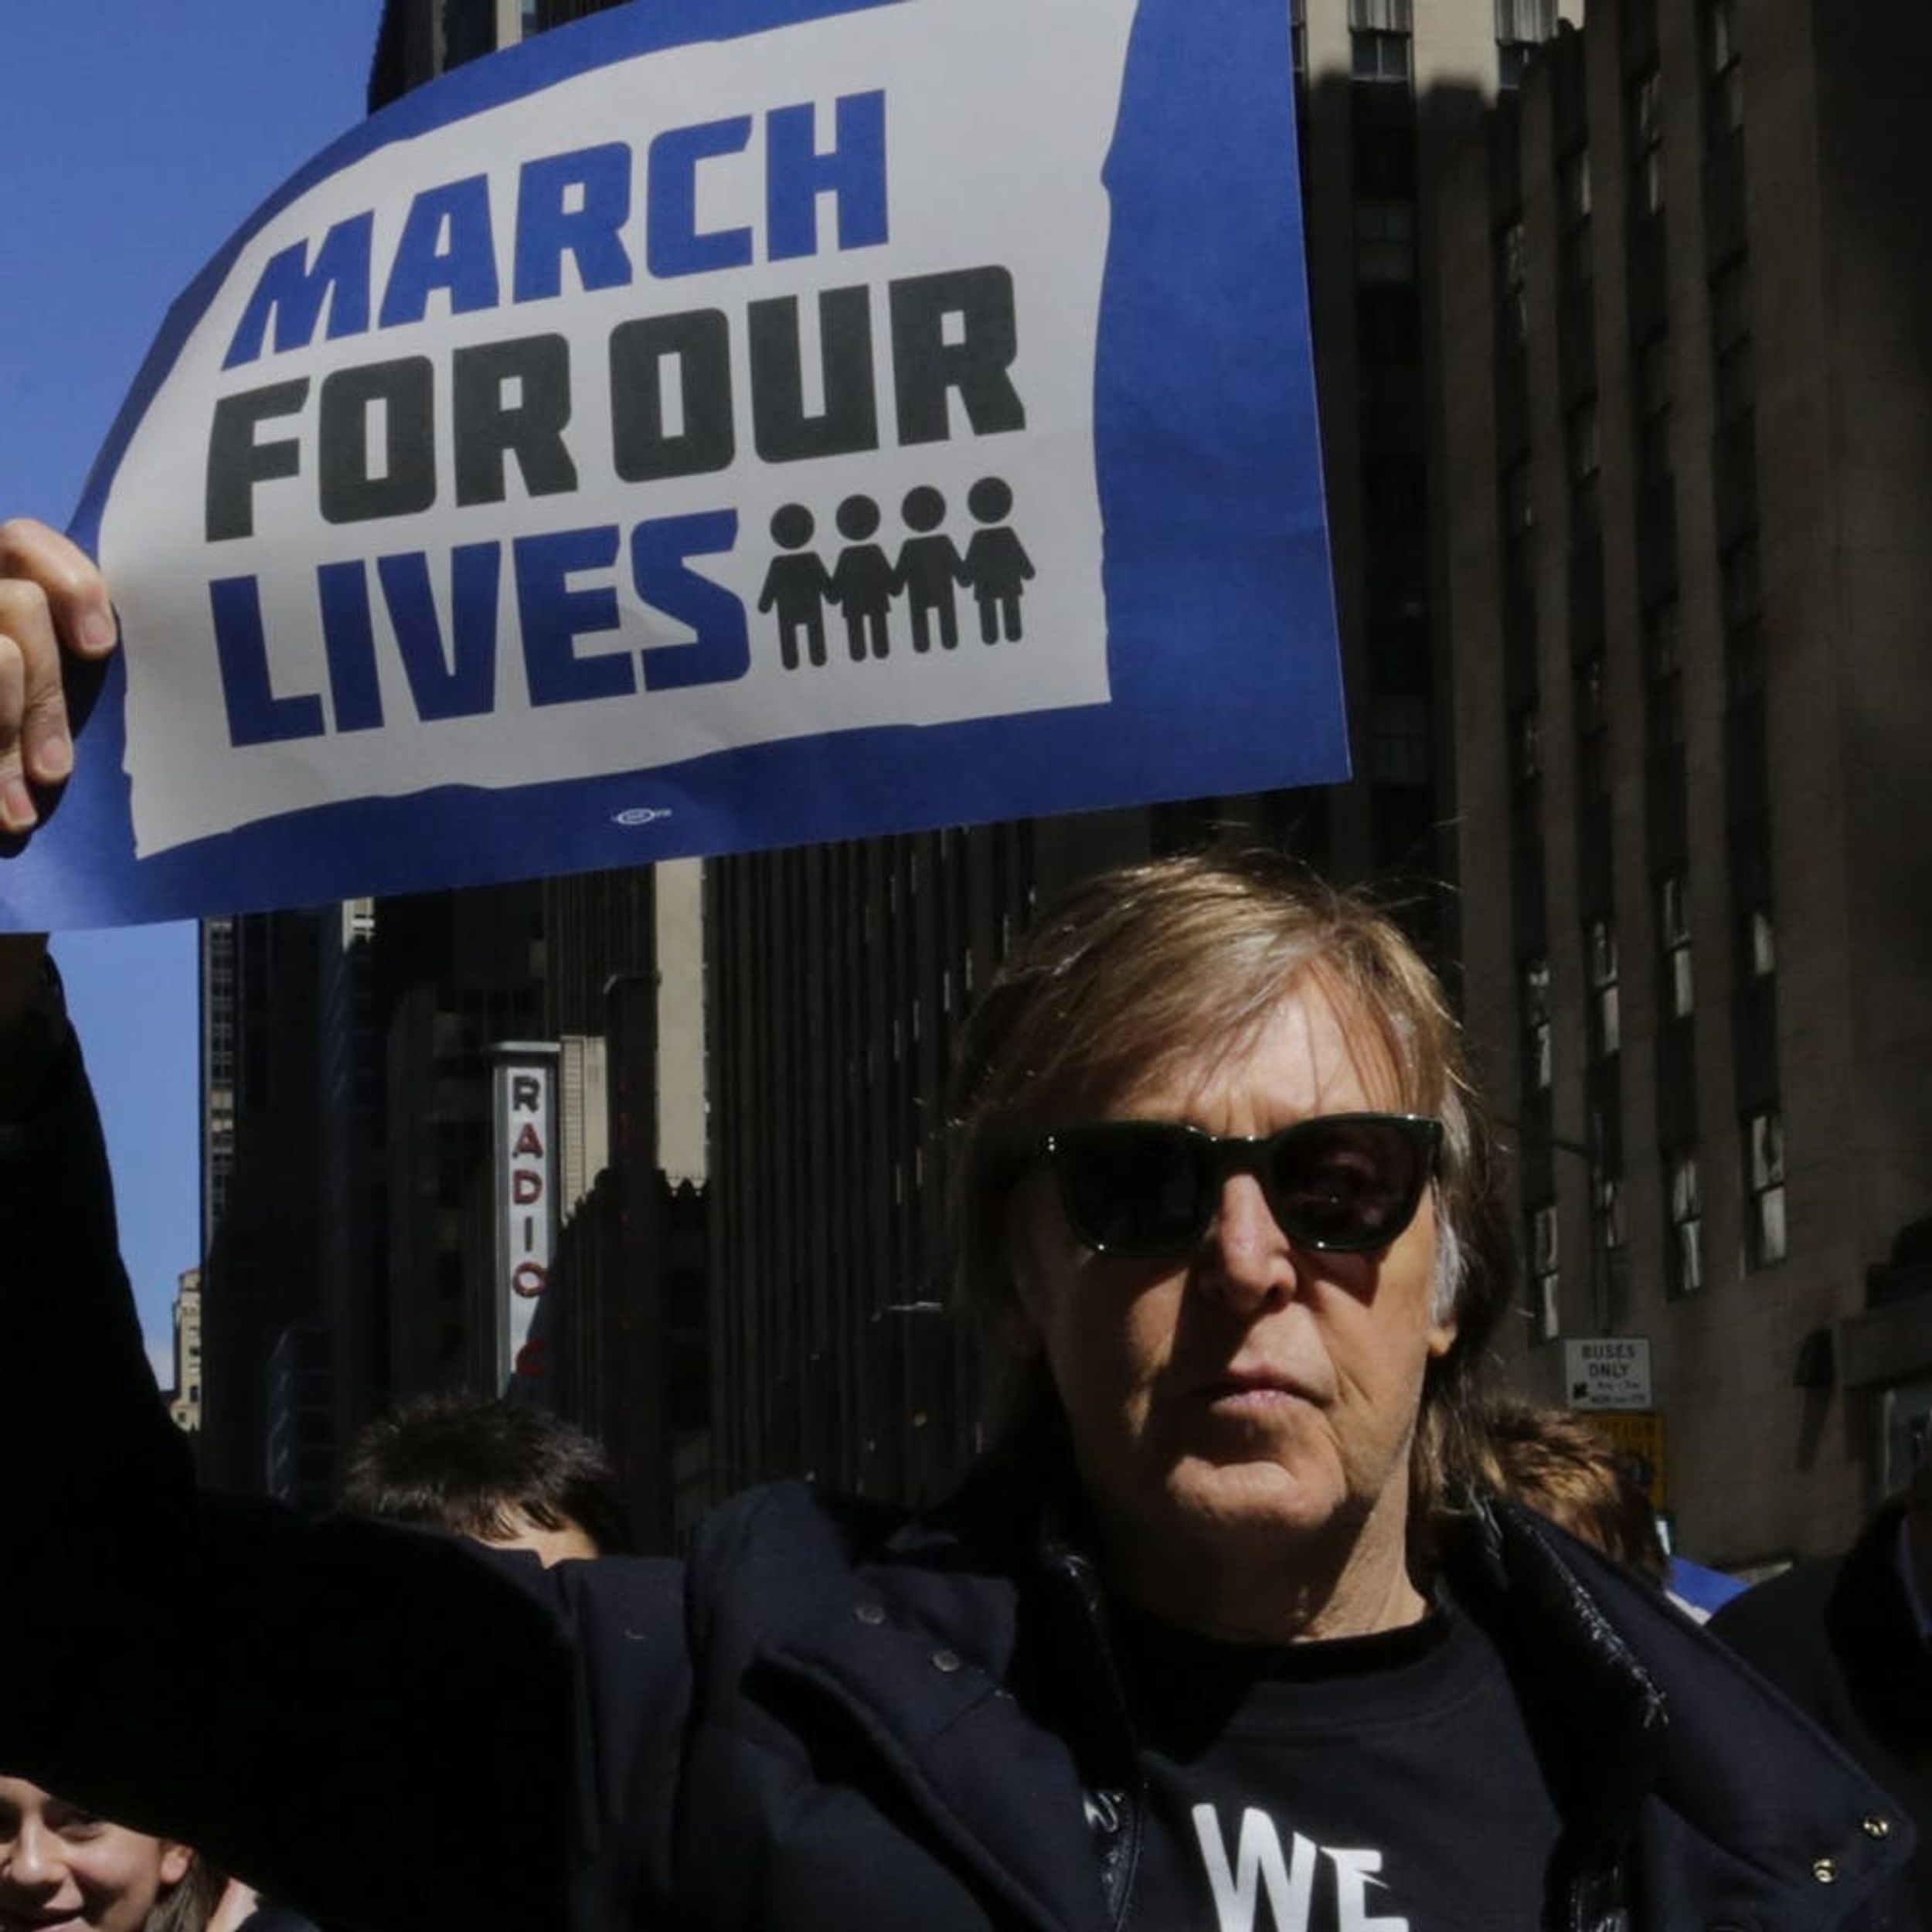 Sir Paul McCartney’s Reason for Attending the March for Our Lives Will Make Your Dad Cry